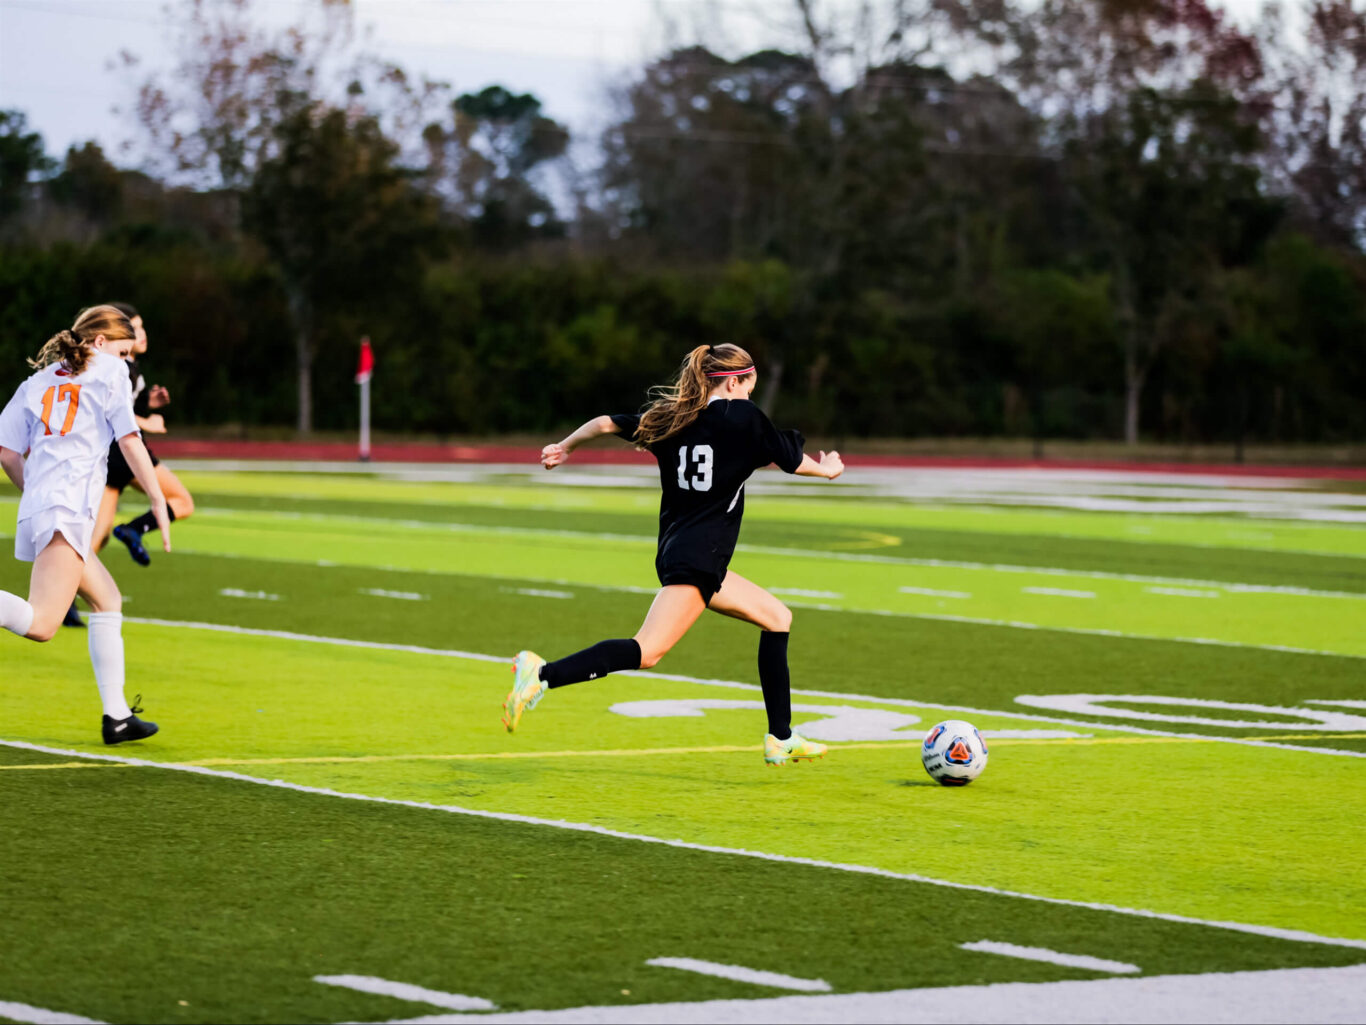 Two girls passionately playing soccer on a large field.